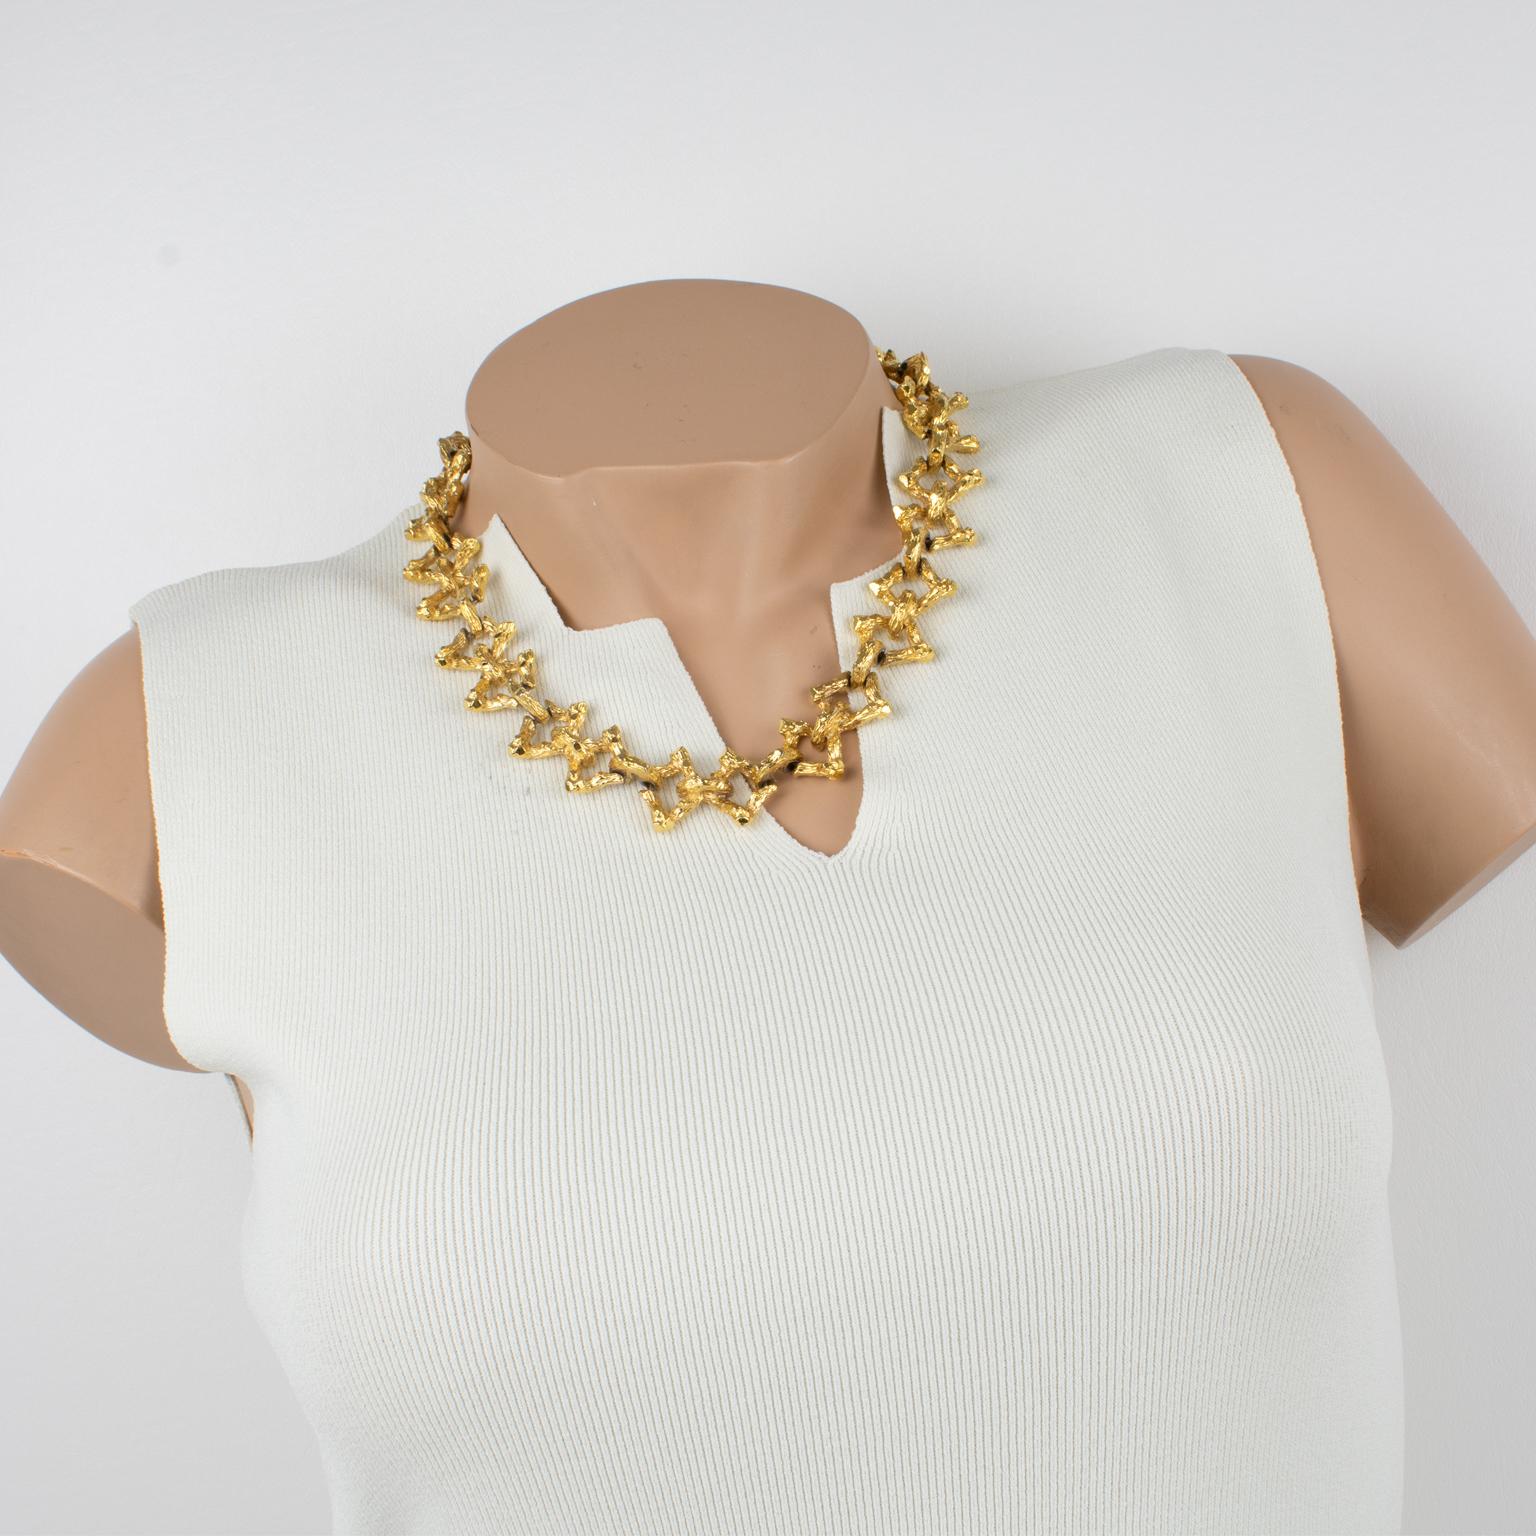 Lovely French designer Guy Laroche Paris choker necklace. Dimensional brutalist shape, with gilt metal all textured. Toggle closing clasp. Signed underside near clasp 